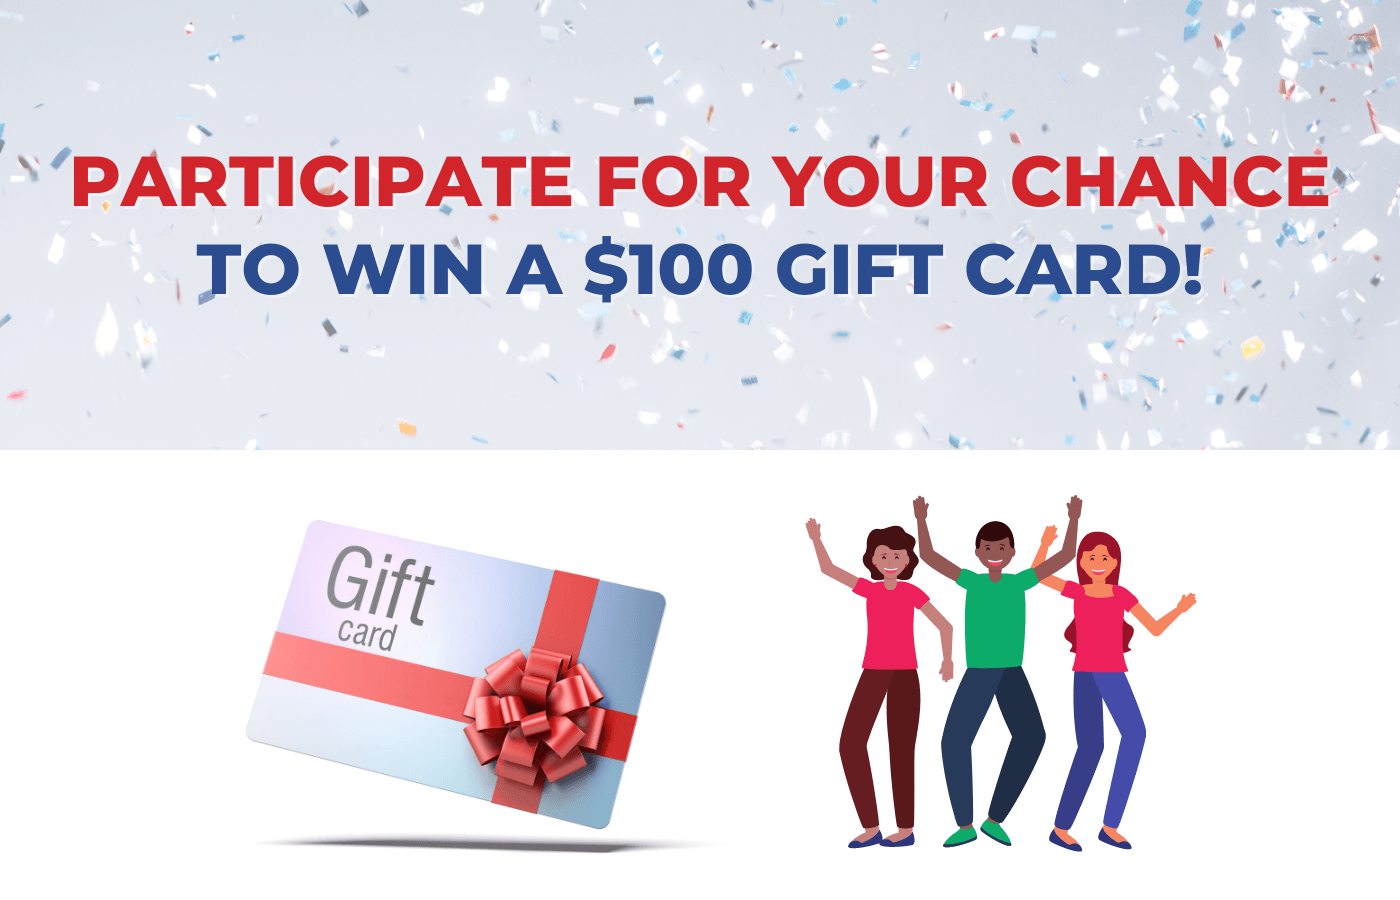 Participate in the event raffle for a $100 gift card